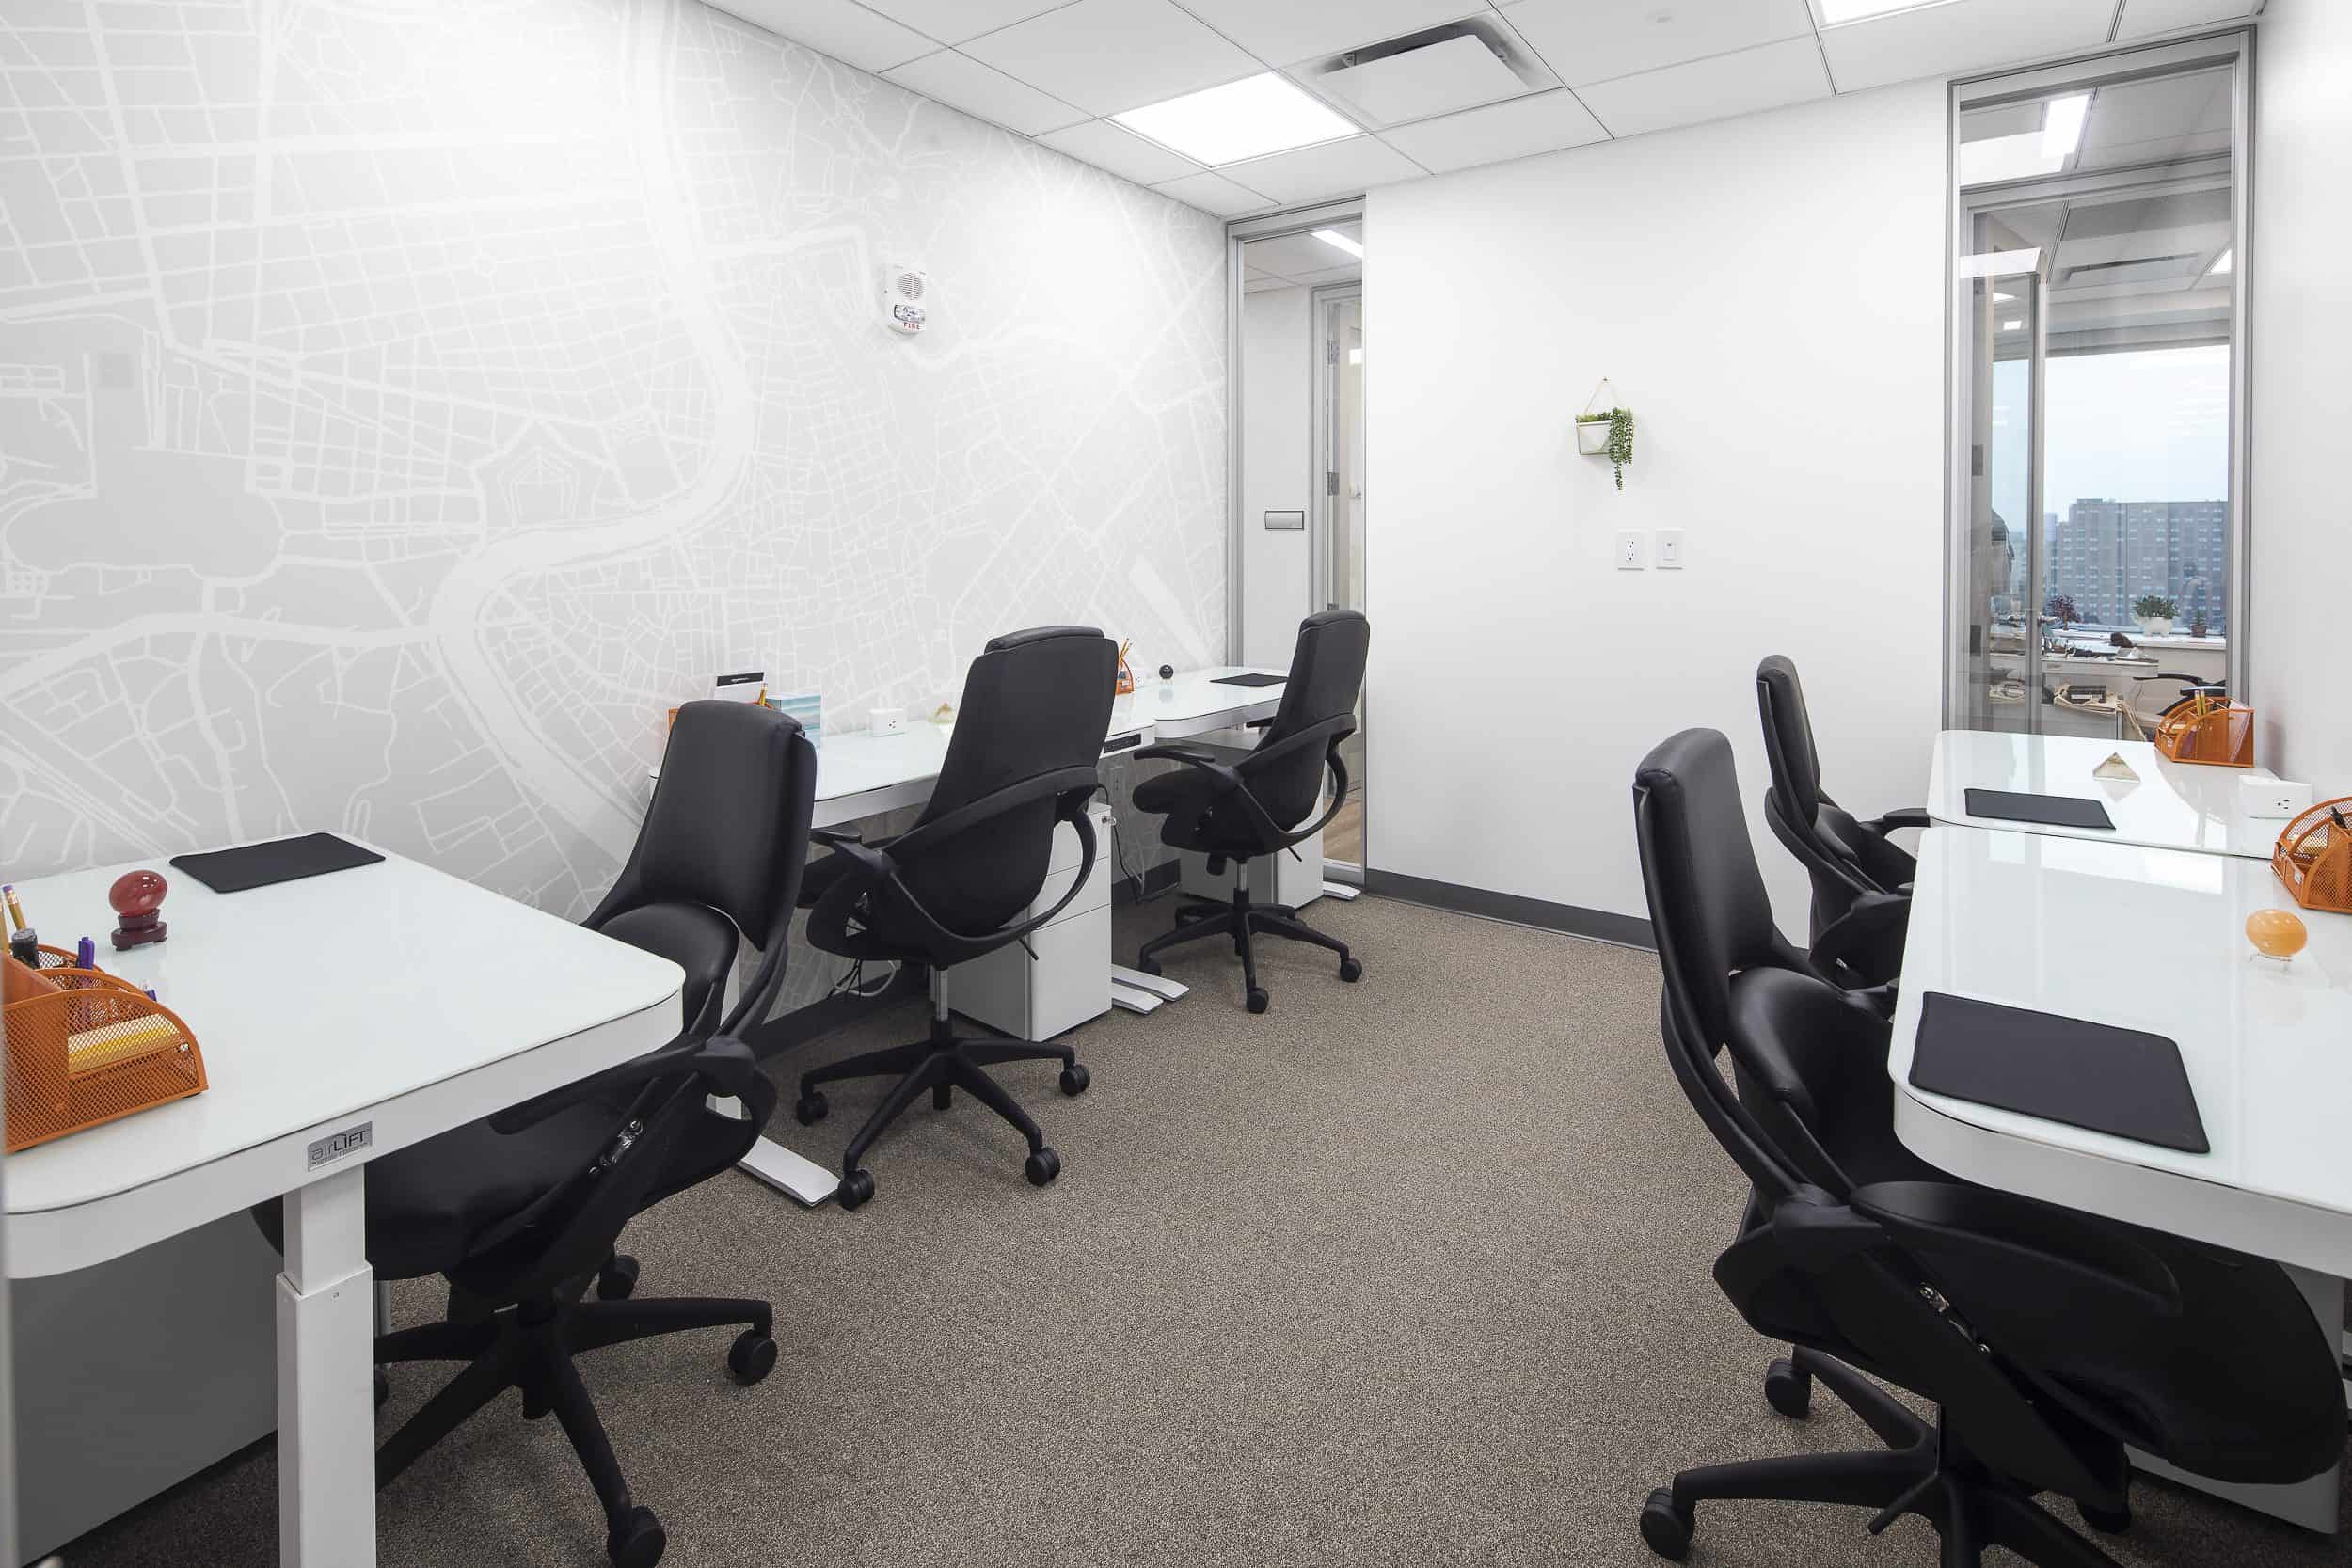 Promote your business productivity with our attractive private office space